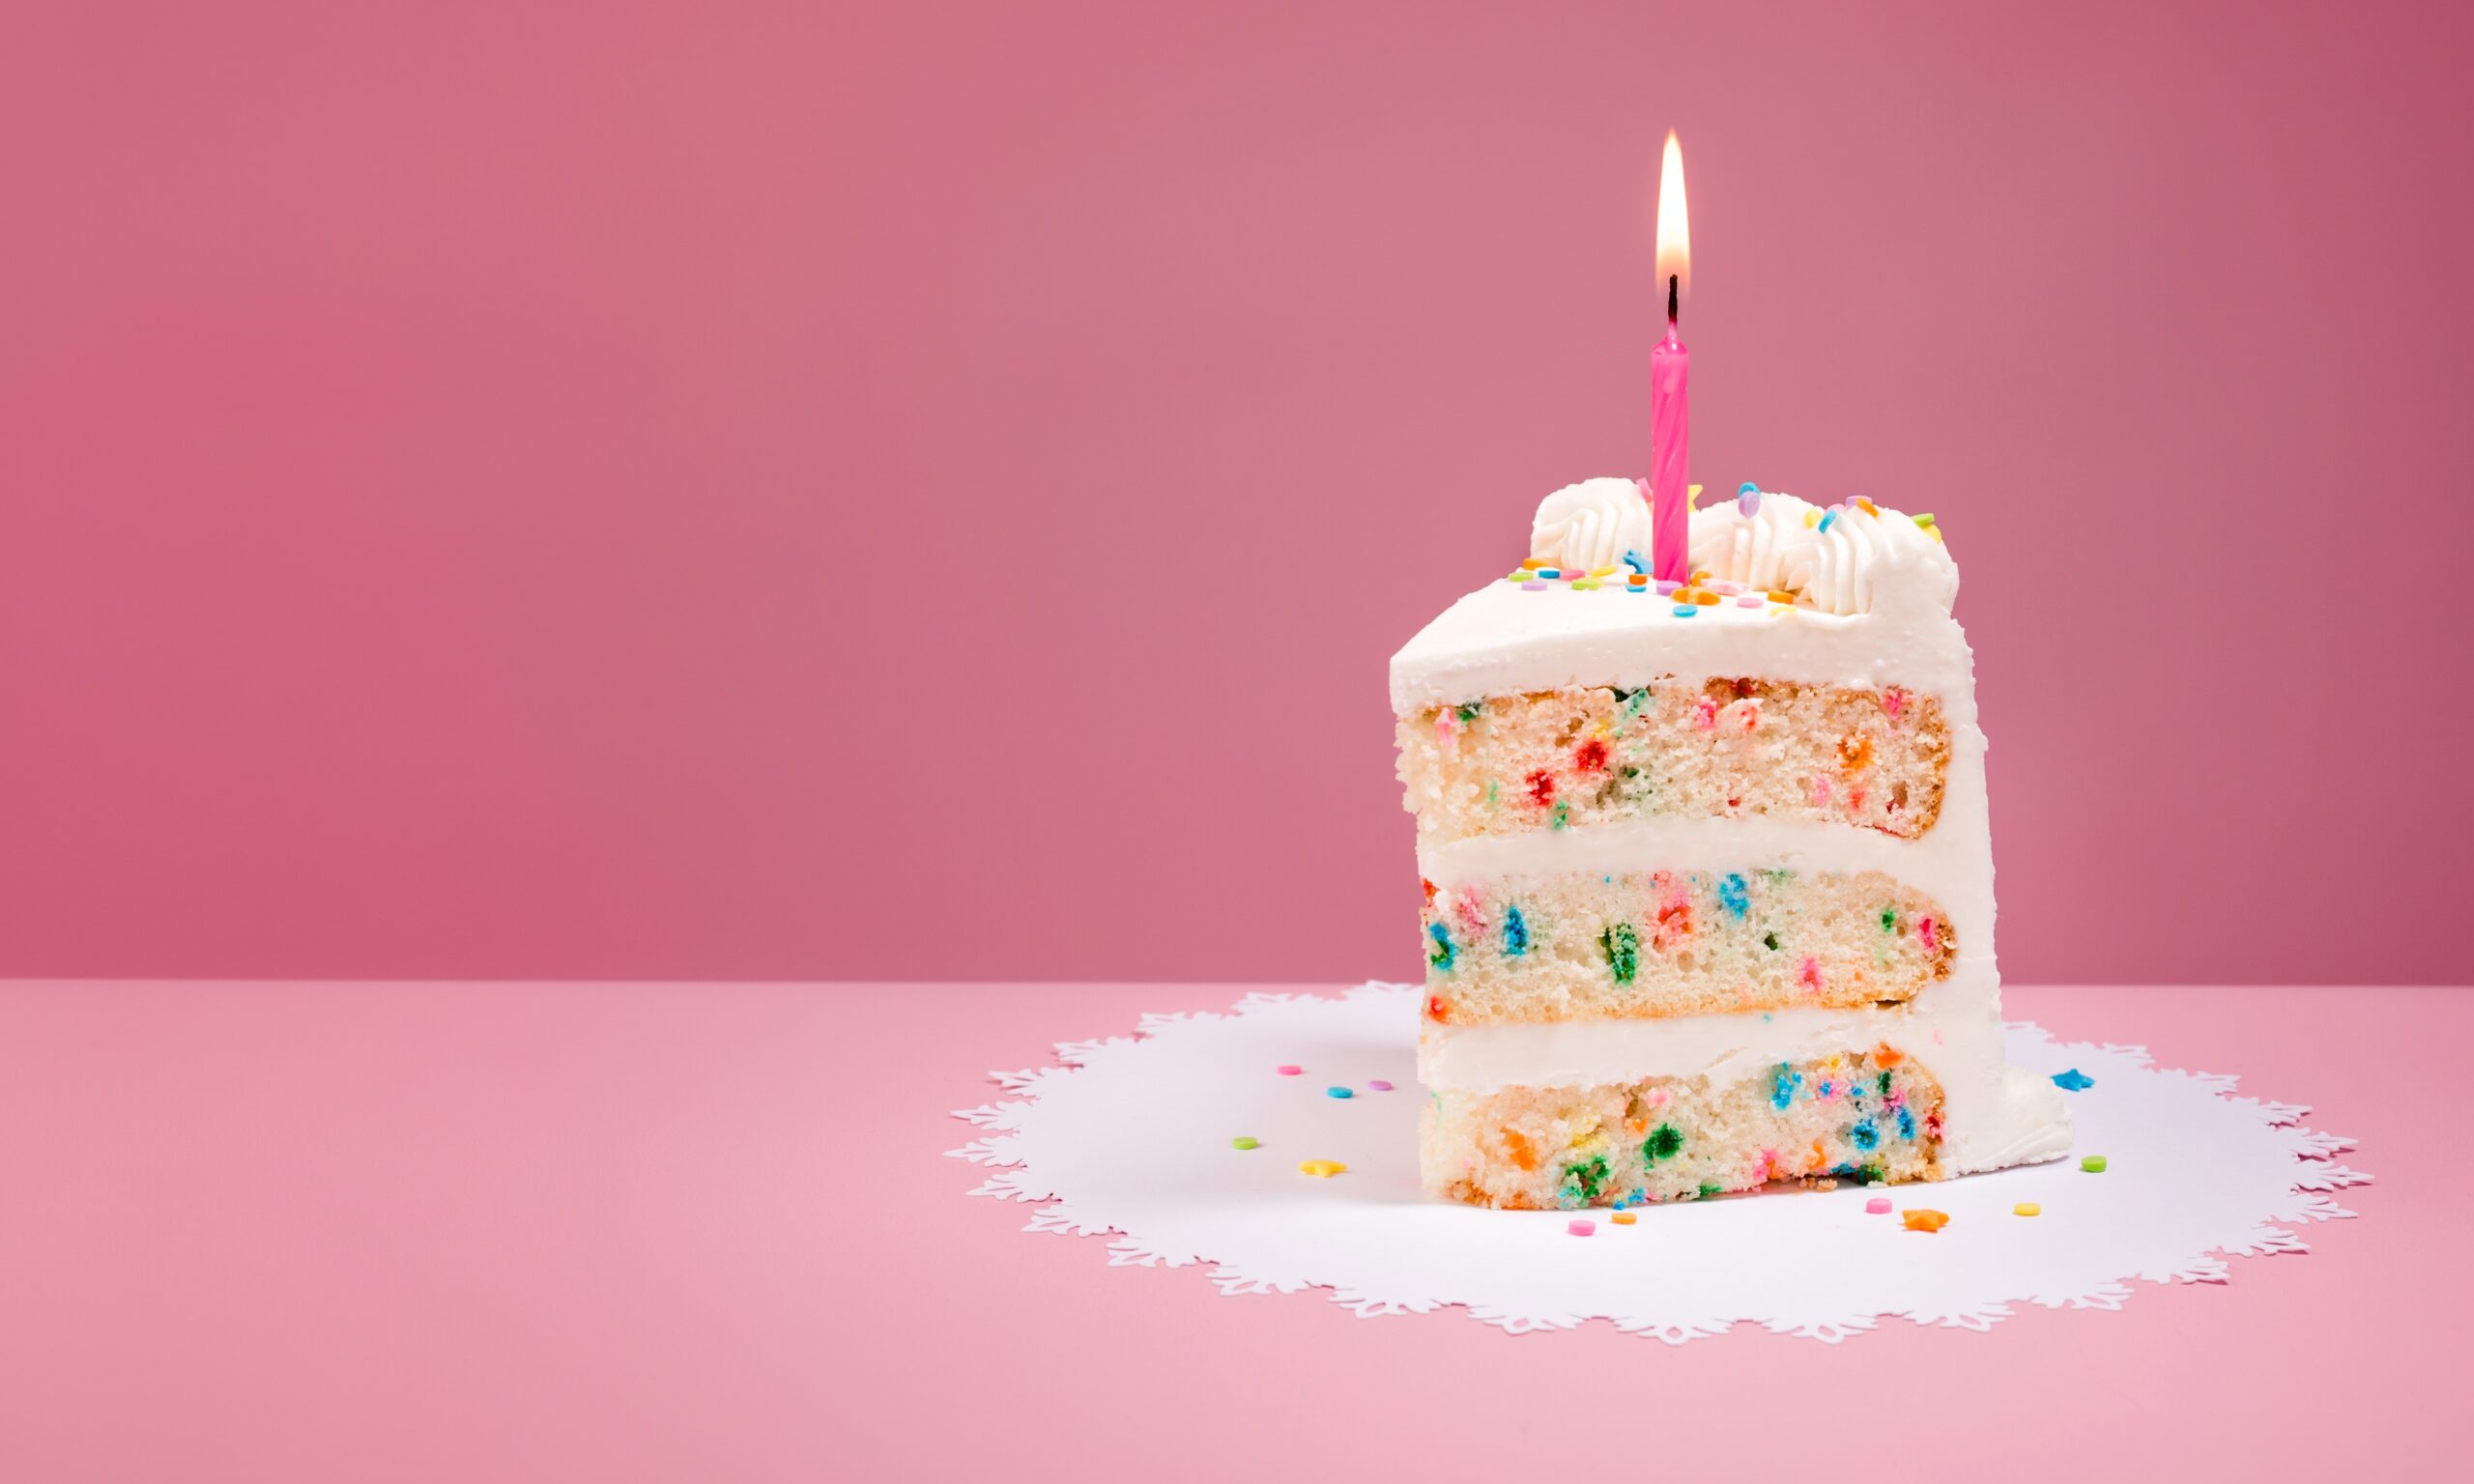 A slice of funfetti cake with vanilla frosting with one birthday candle sitting against a pink backdrop.